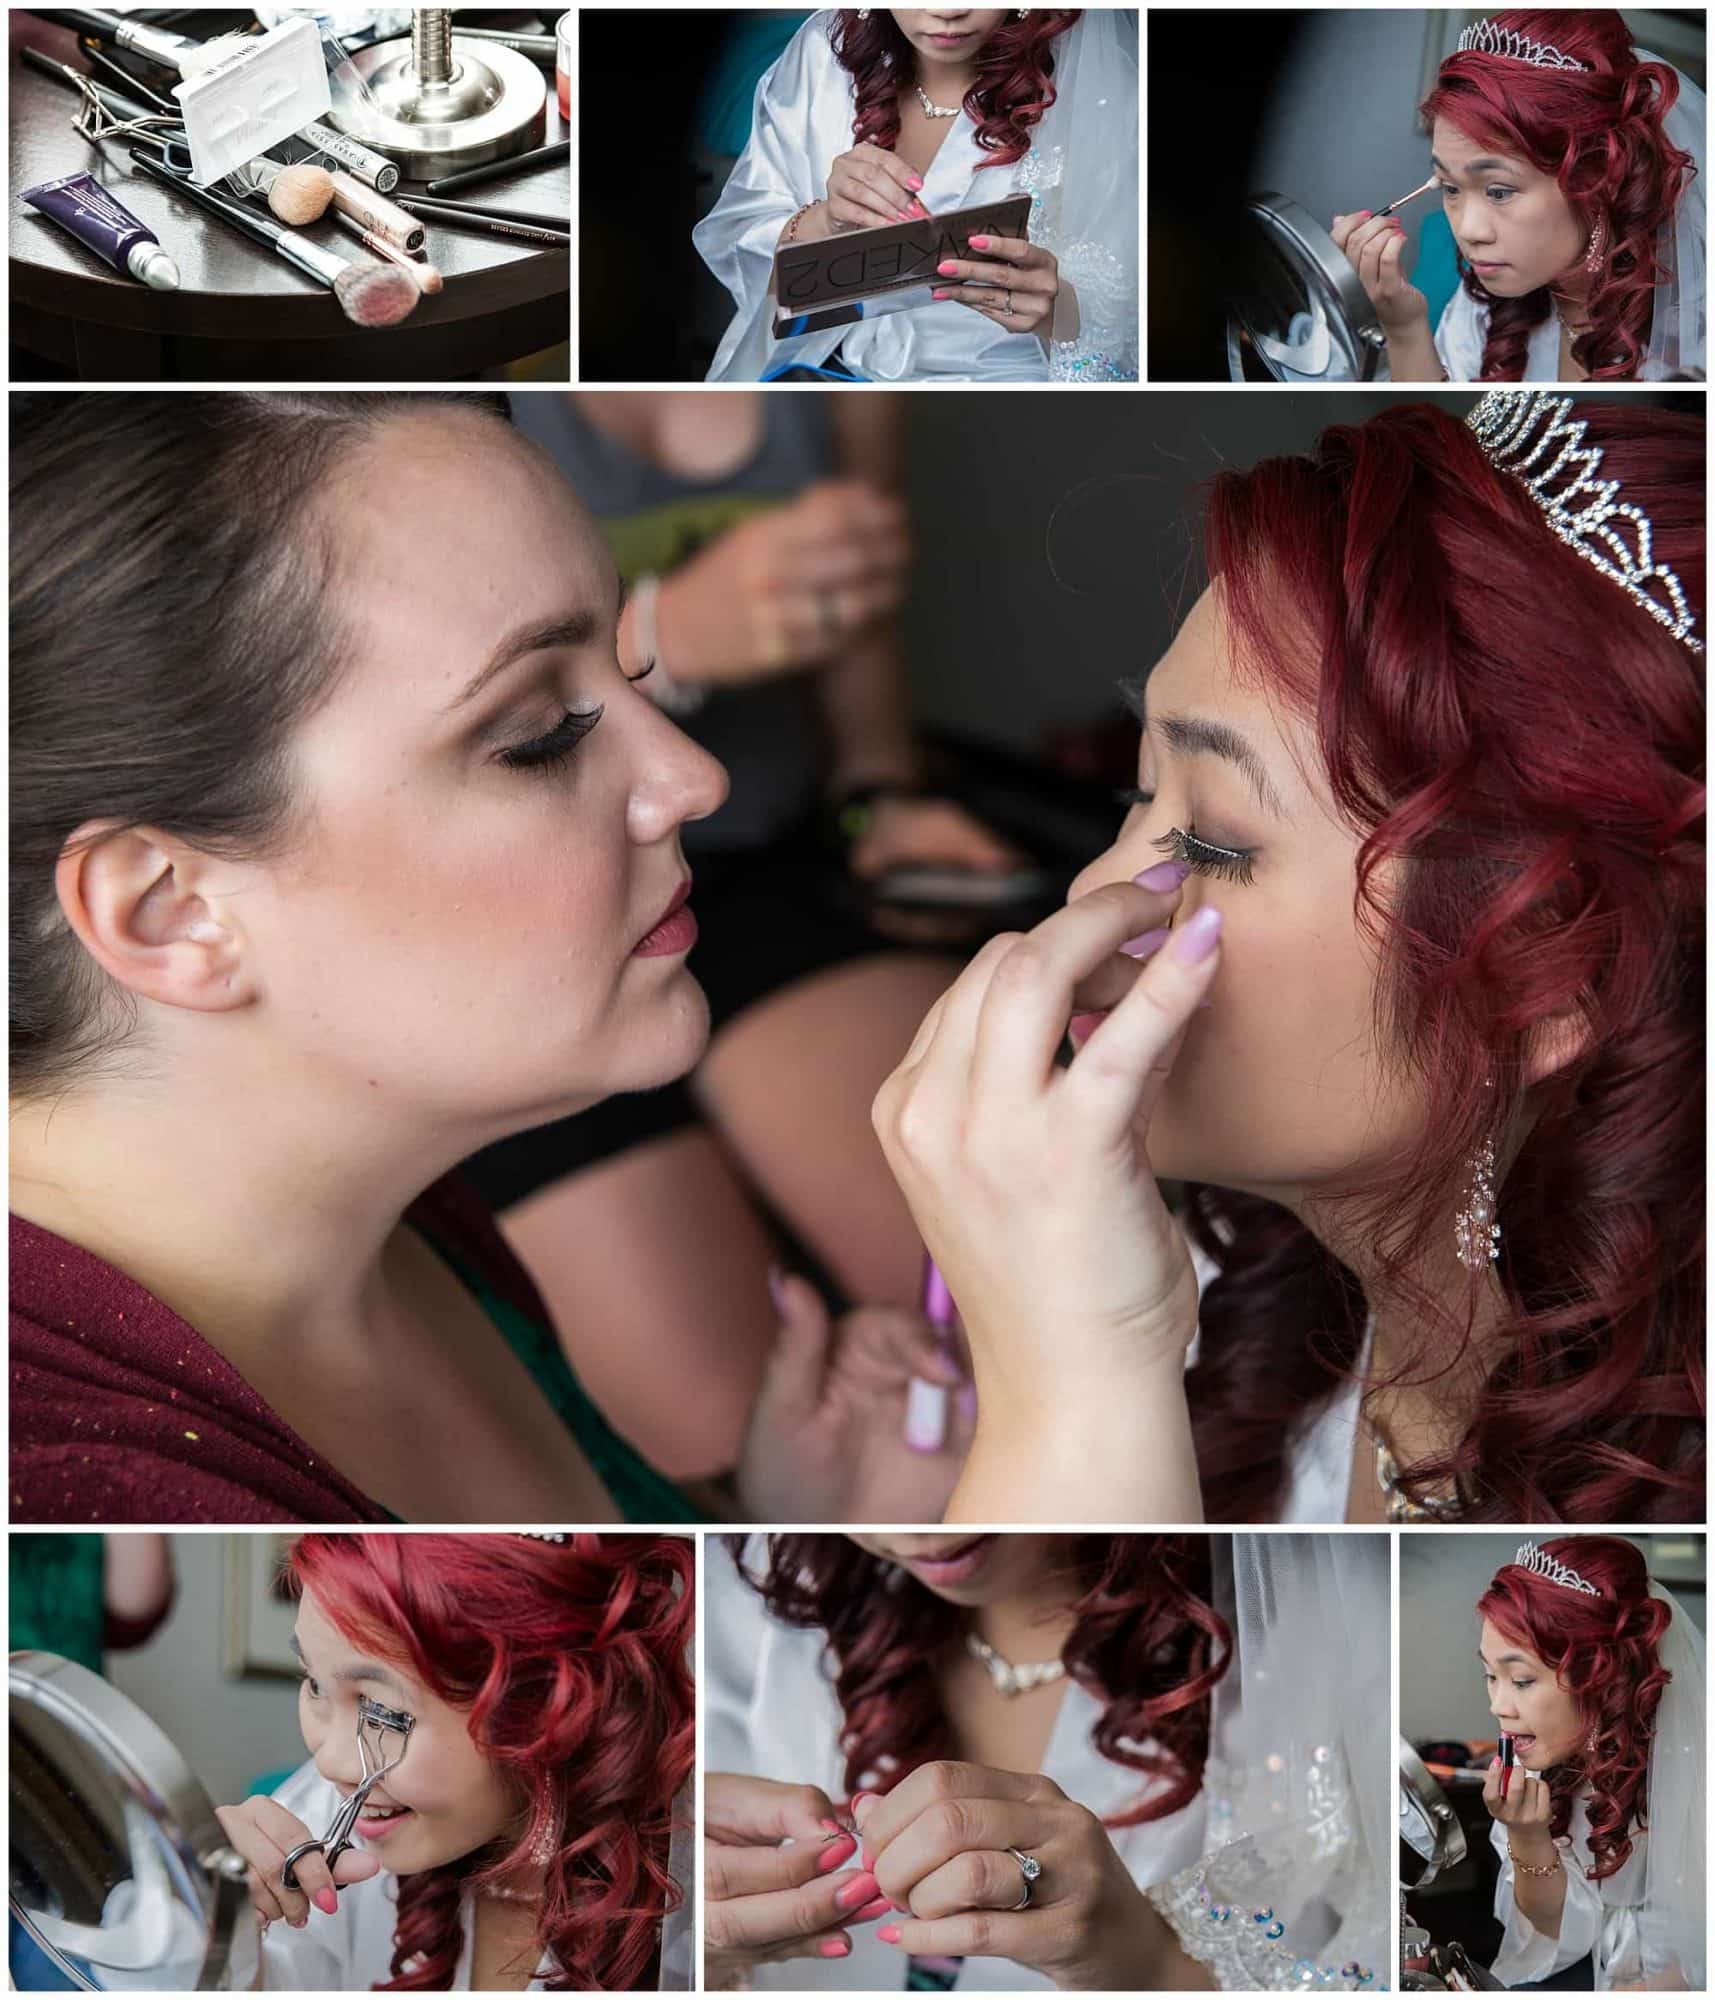 The bride applies her makeup prior to her wedding day during bridal prep at the Atlantica Hotel in Halifax, NS.